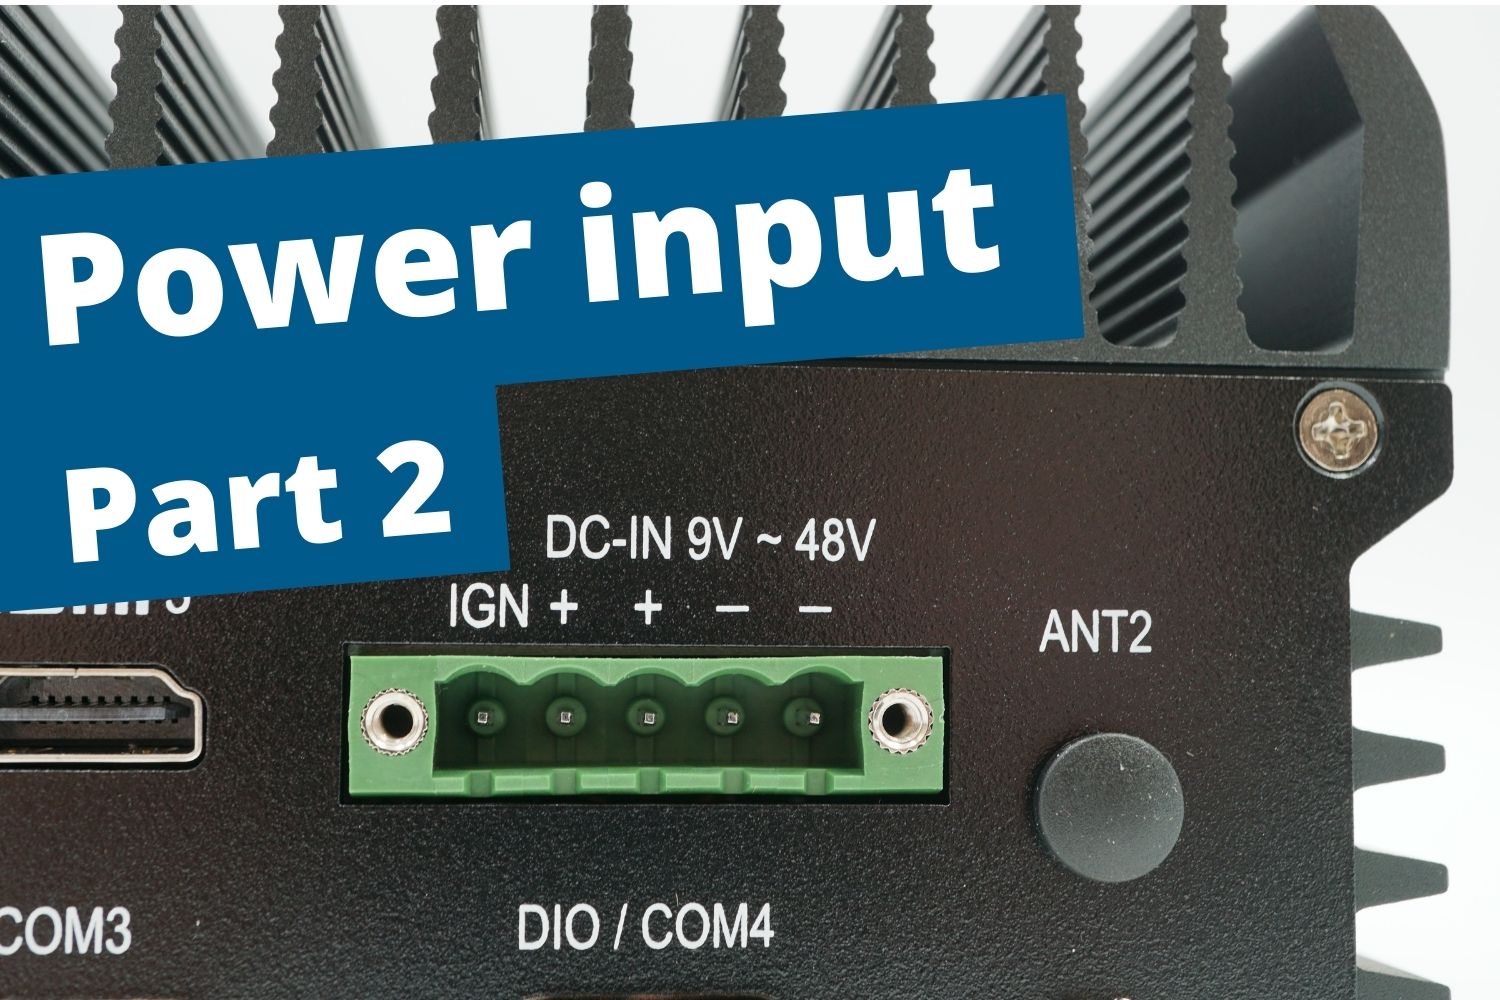 The power input of the Mini PC – Part 2: Vehicle PC  